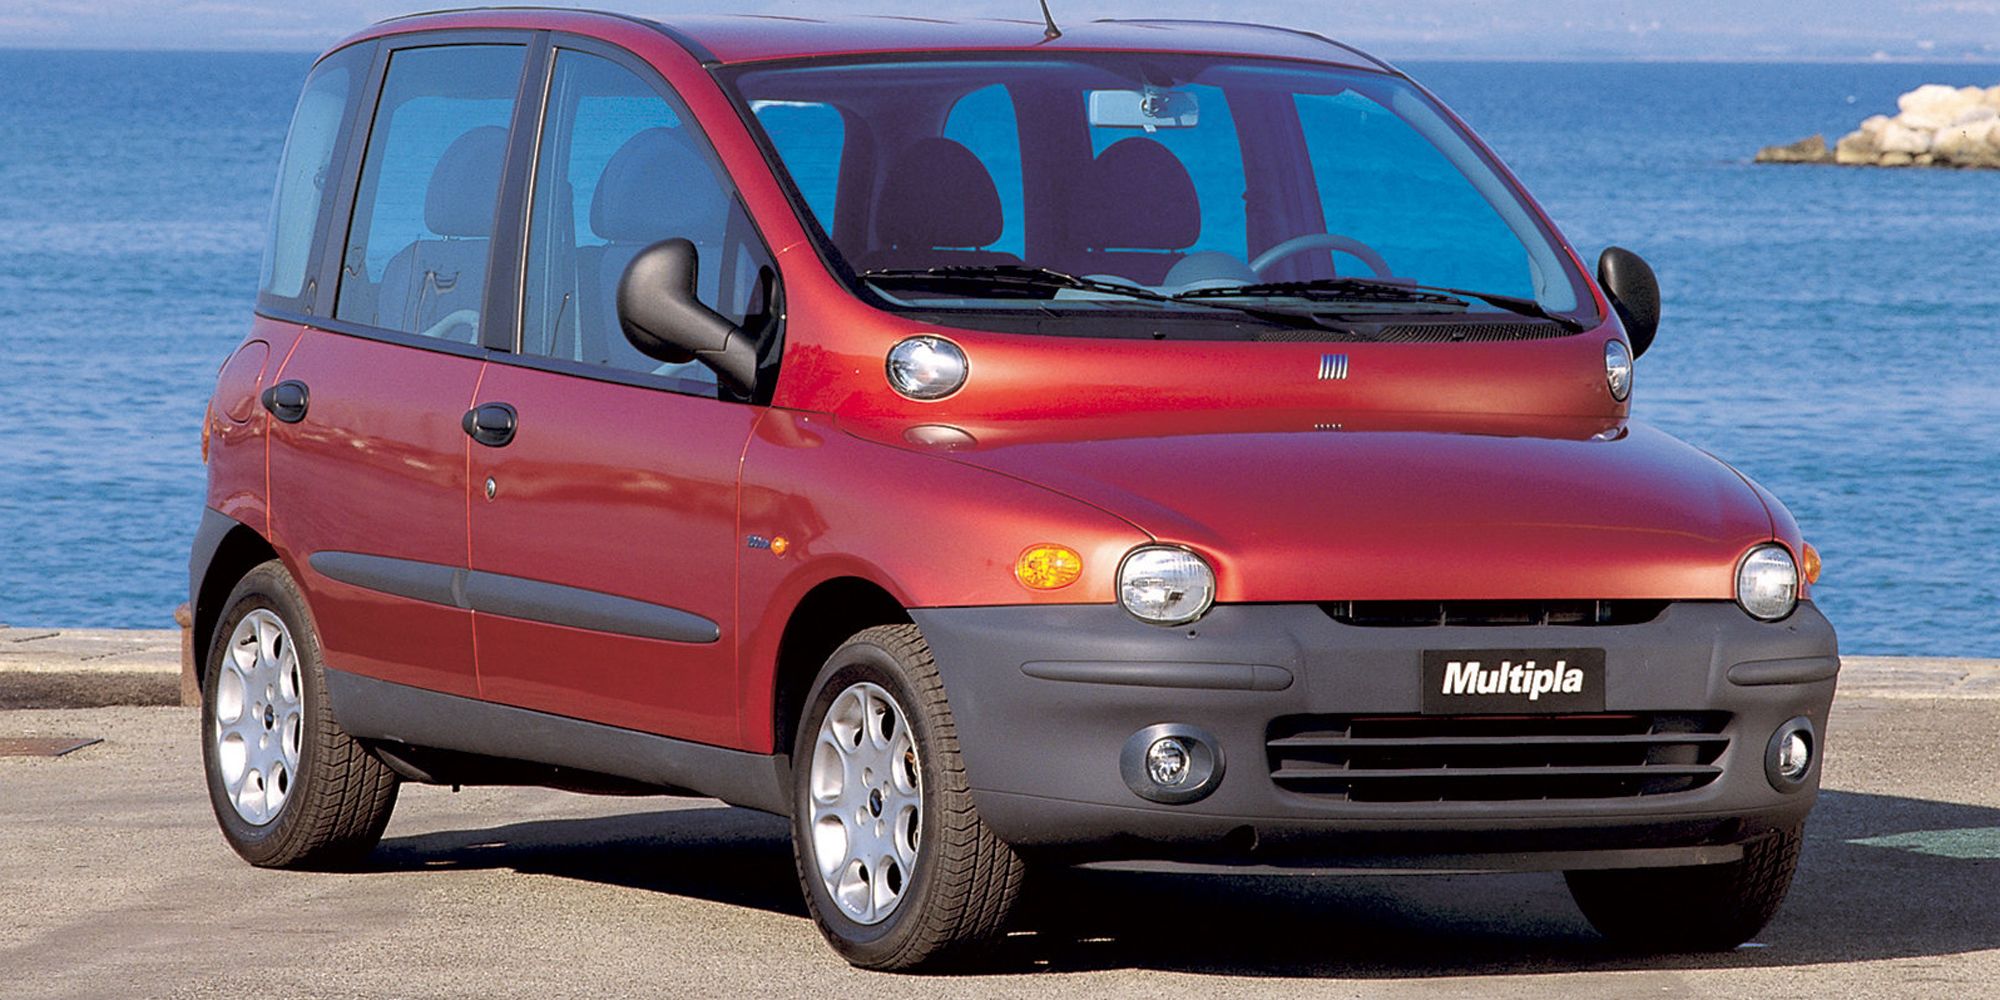 The front of a pre-facelift Multipla